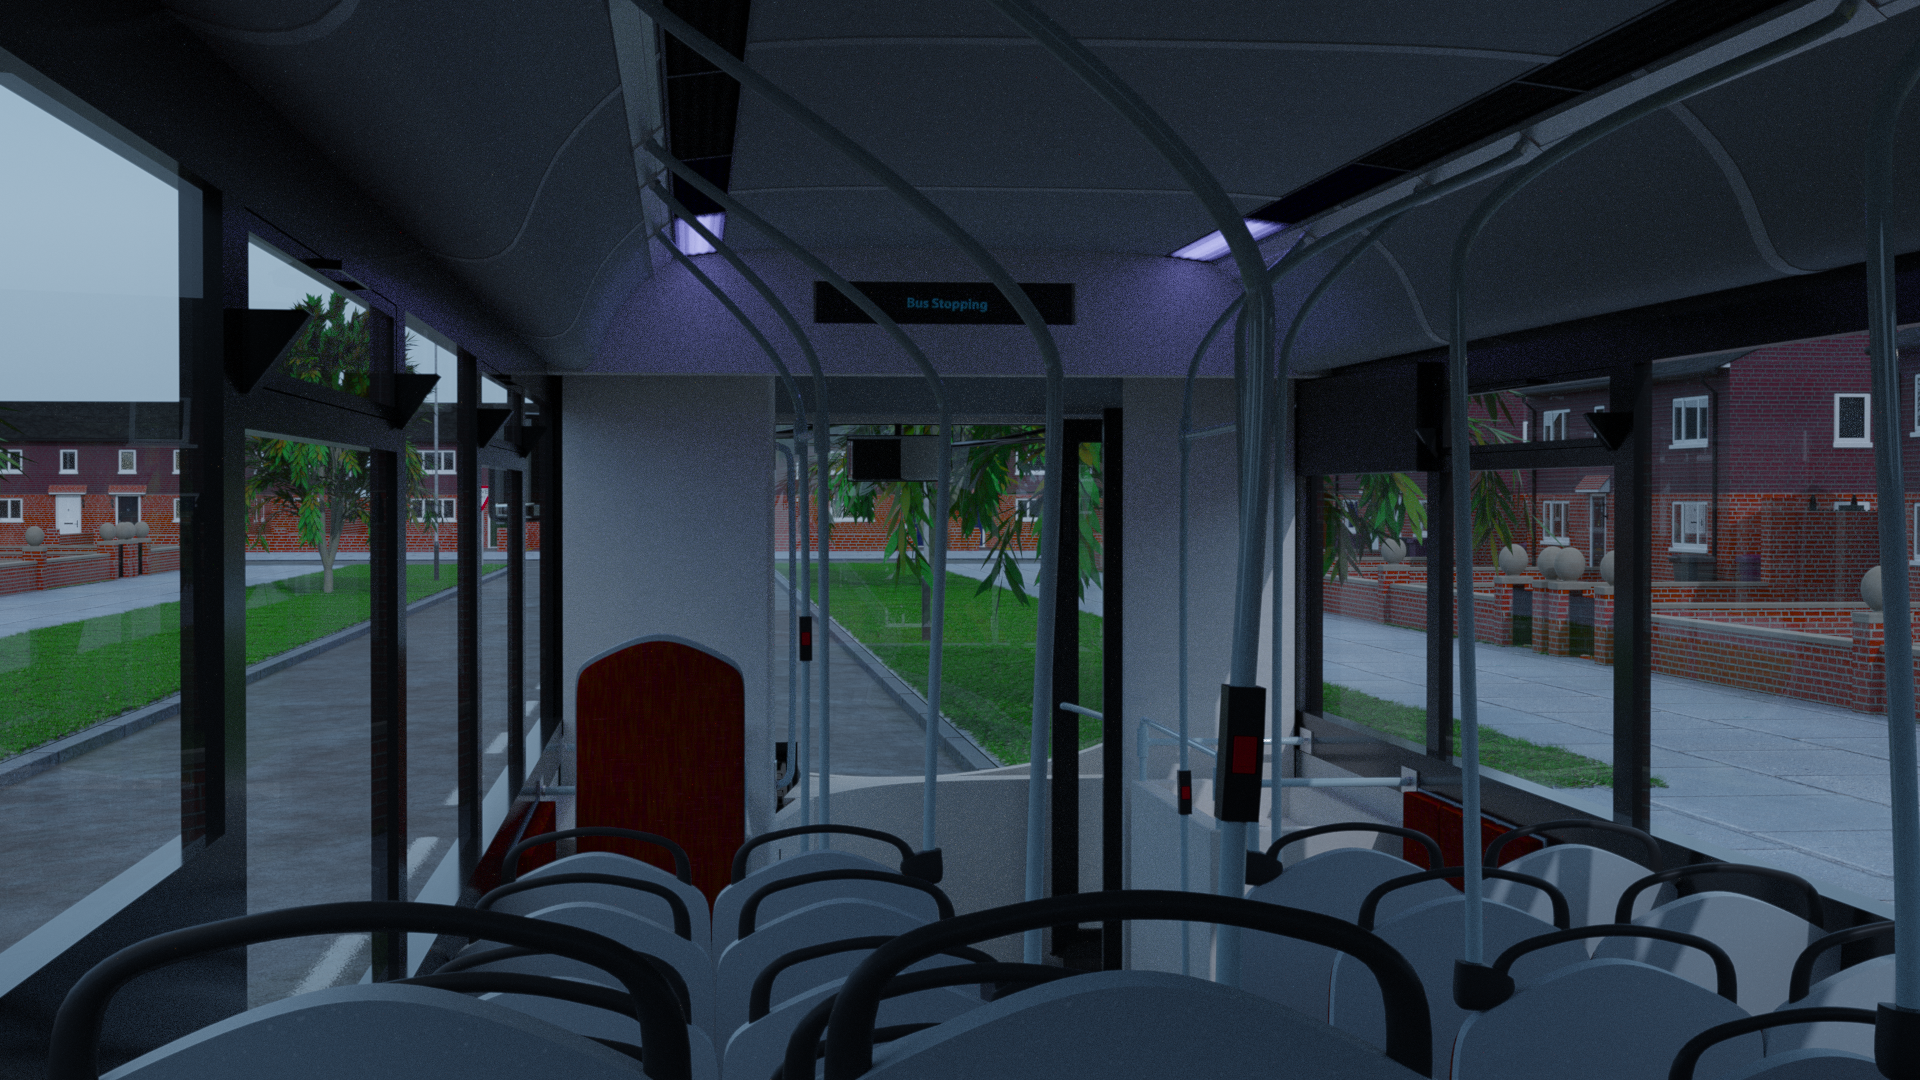 Transit Bus | One Service Door preview image 2